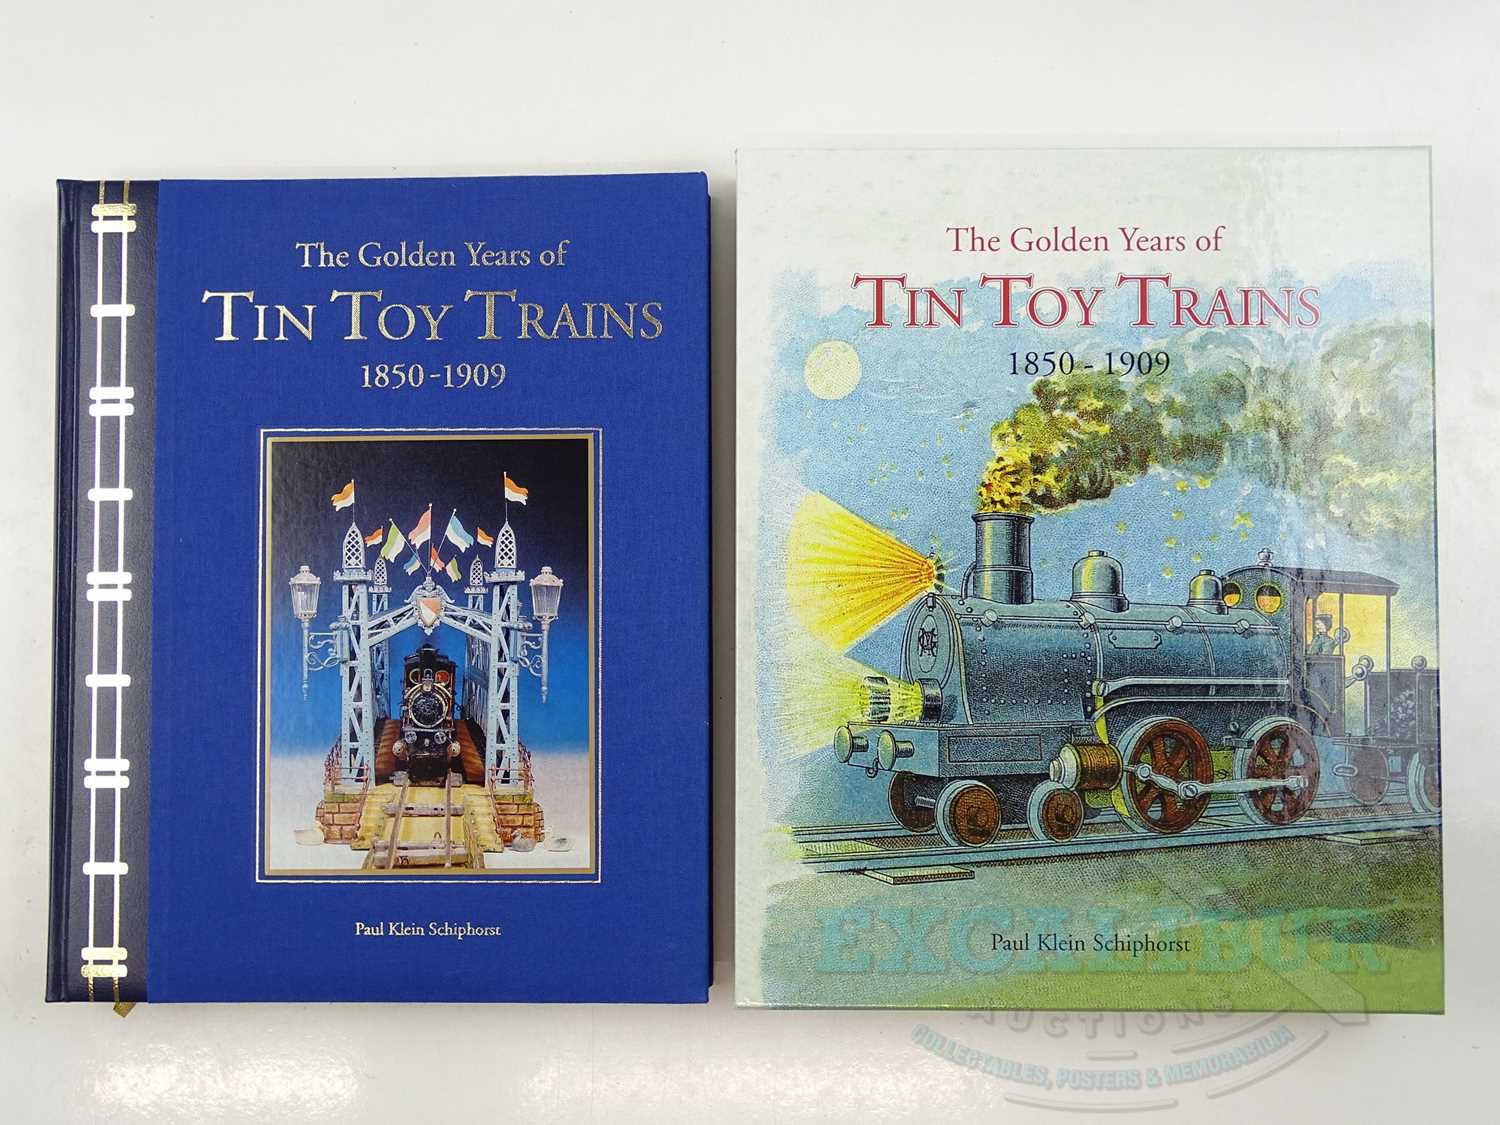 A copy of 'The Golden Years of Tin Toy Trains 1850-1909' by Paul Klein Schiphorst, pub. 1999 - VG in